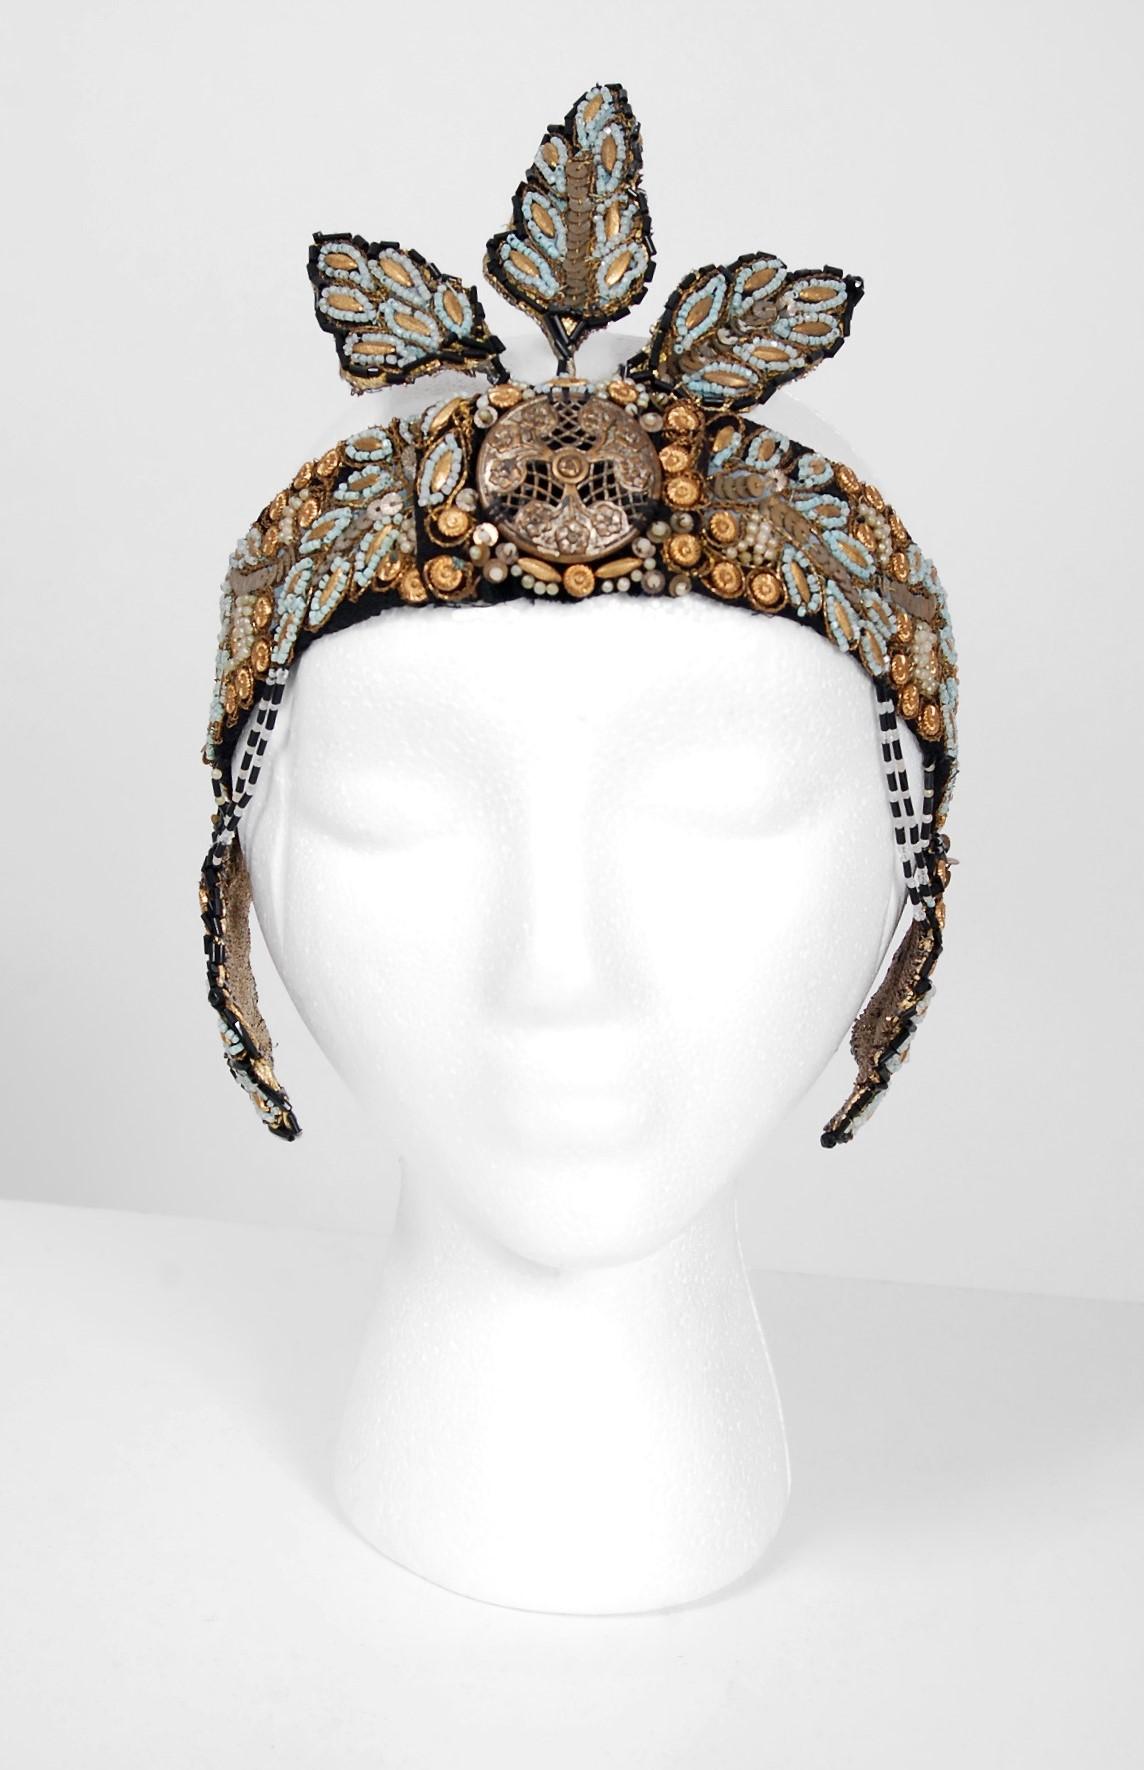 Breathtaking French Couture metallic-gold and turquoise flapper formal headpiece dating back to the mid 1920's. This is, without a doubt, one of the most extraordinary antique crowns I have ever laid eyes on. Gorgeous tube glass-beads and